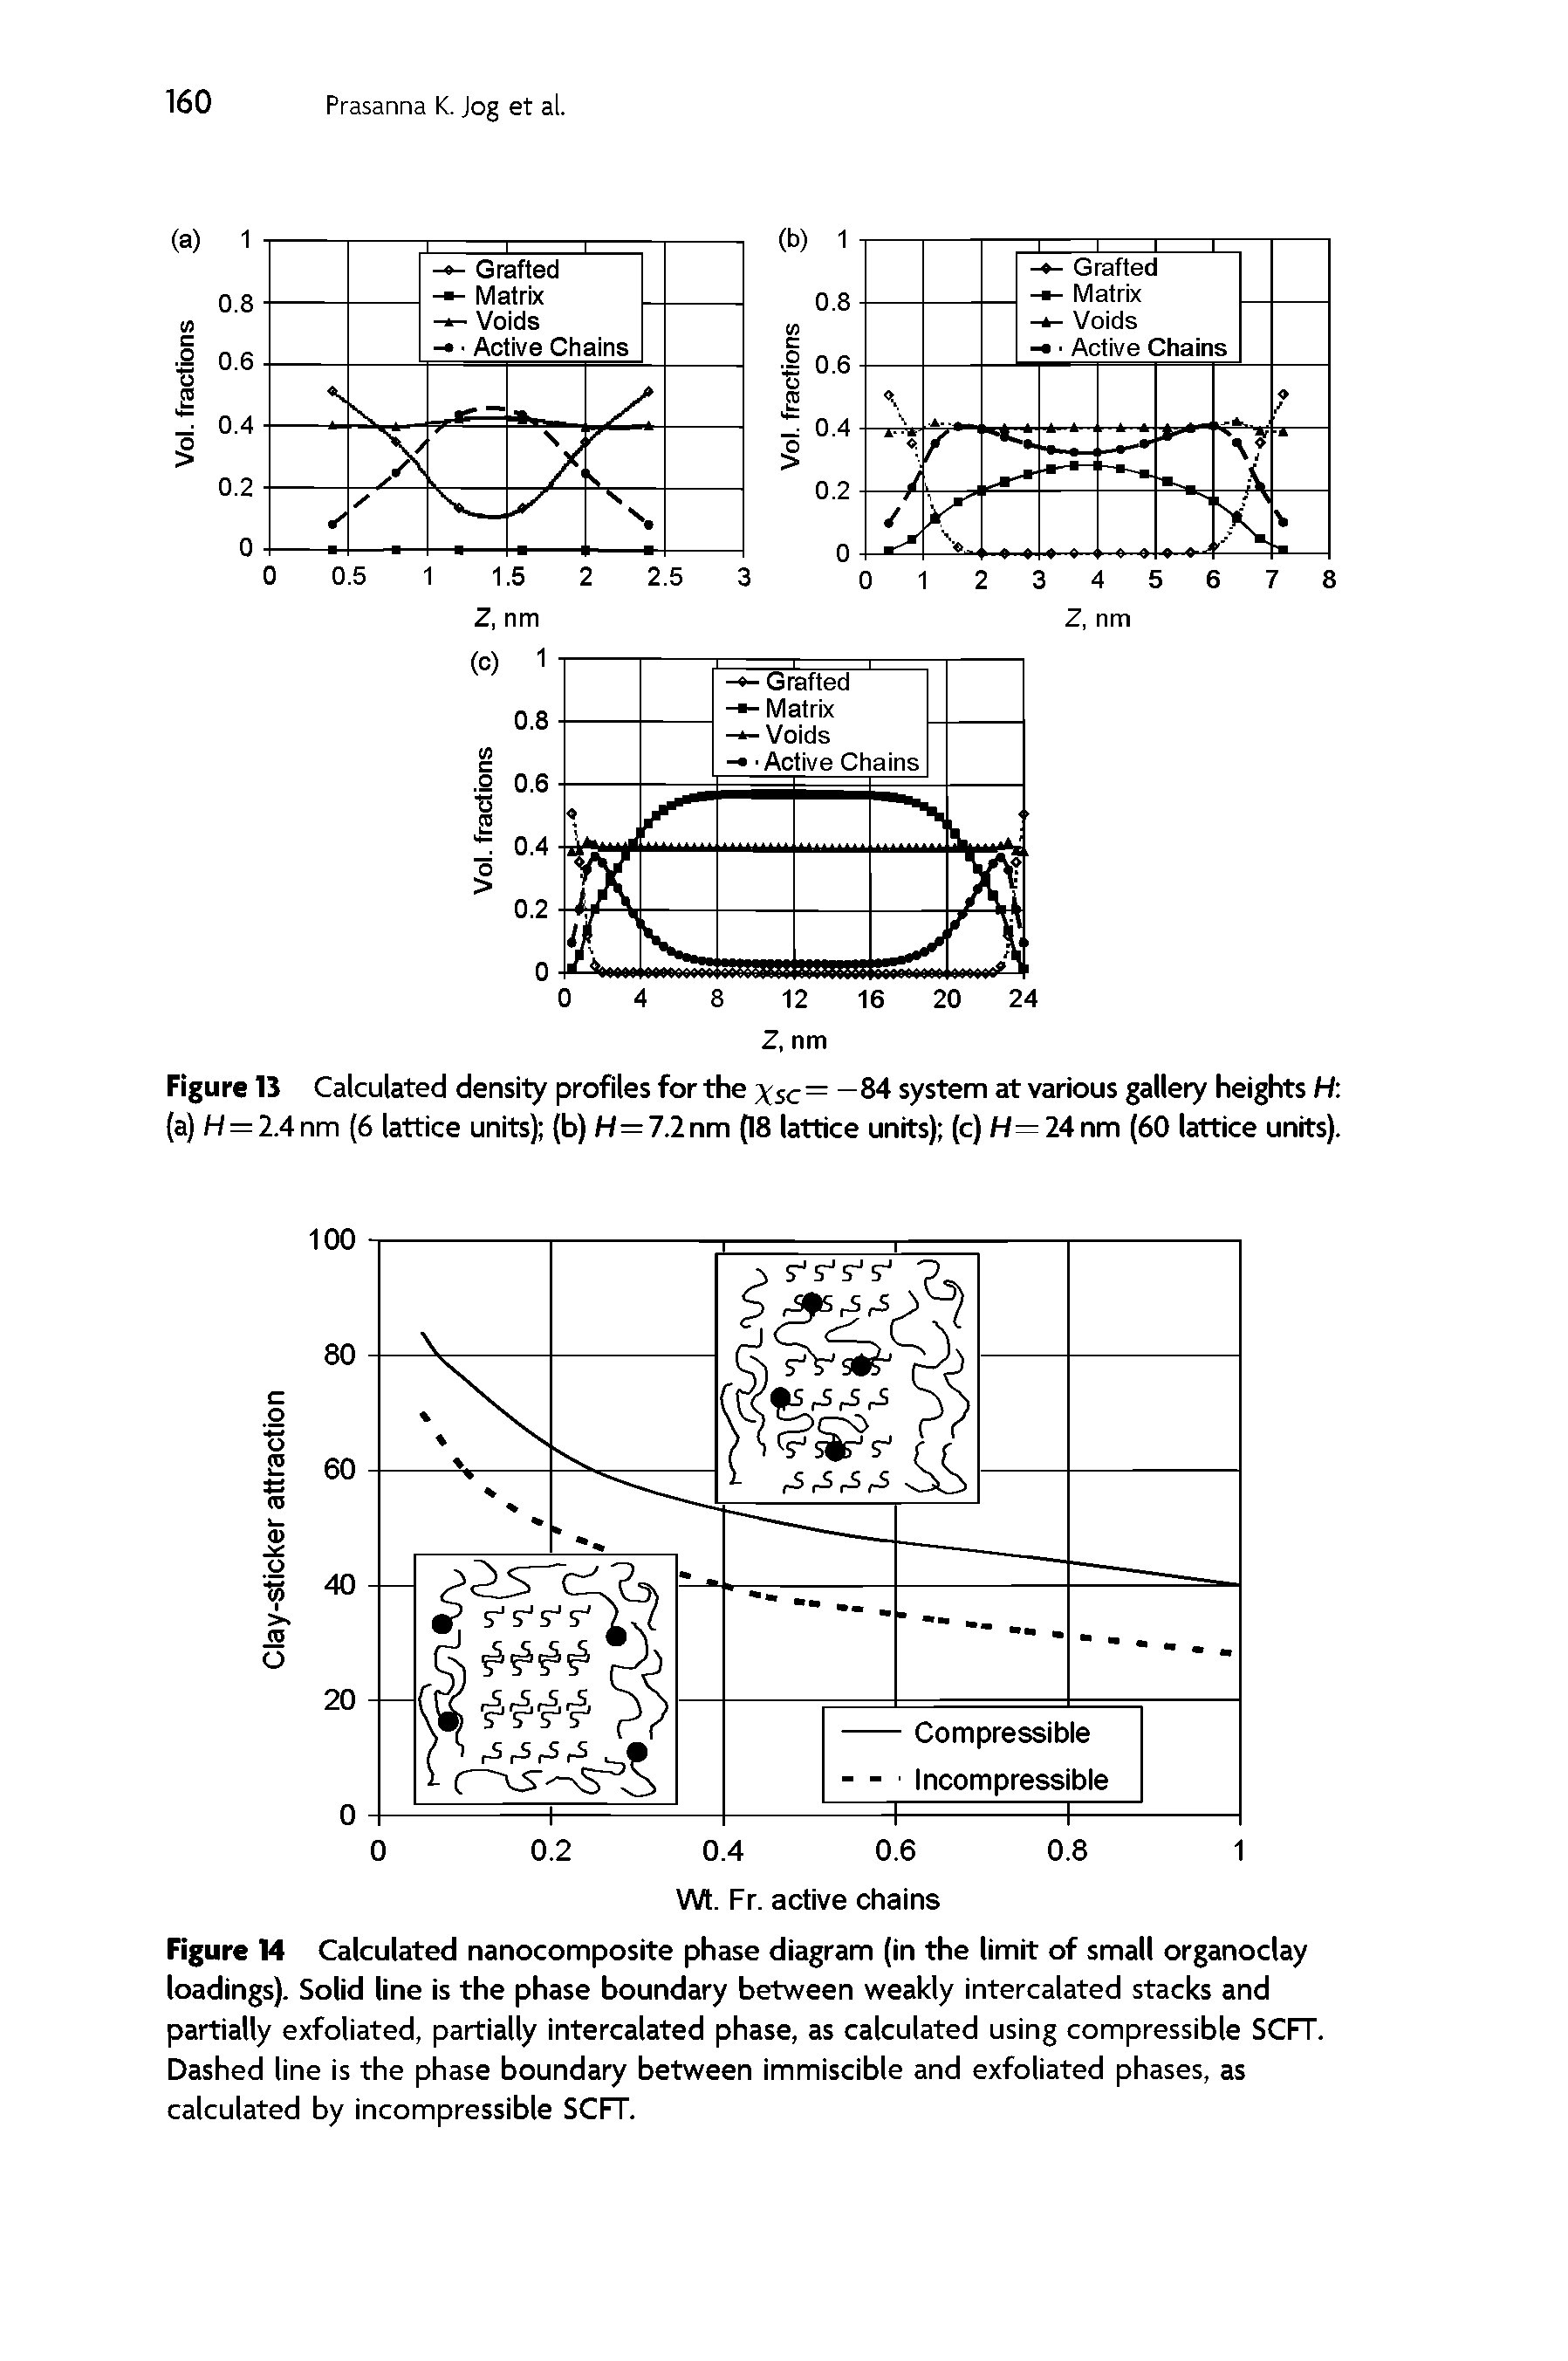 Figure M Calculated nanocomposite phase diagram (in the limit of small organoclay loadings). Solid line is the phase boundary between weakly intercalated stacks and partially exfoliated, partially intercalated phase, as calculated using compressible SCFT. Dashed line is the phase boundary between immiscible and exfoliated phases, as calculated by incompressible SCFT.